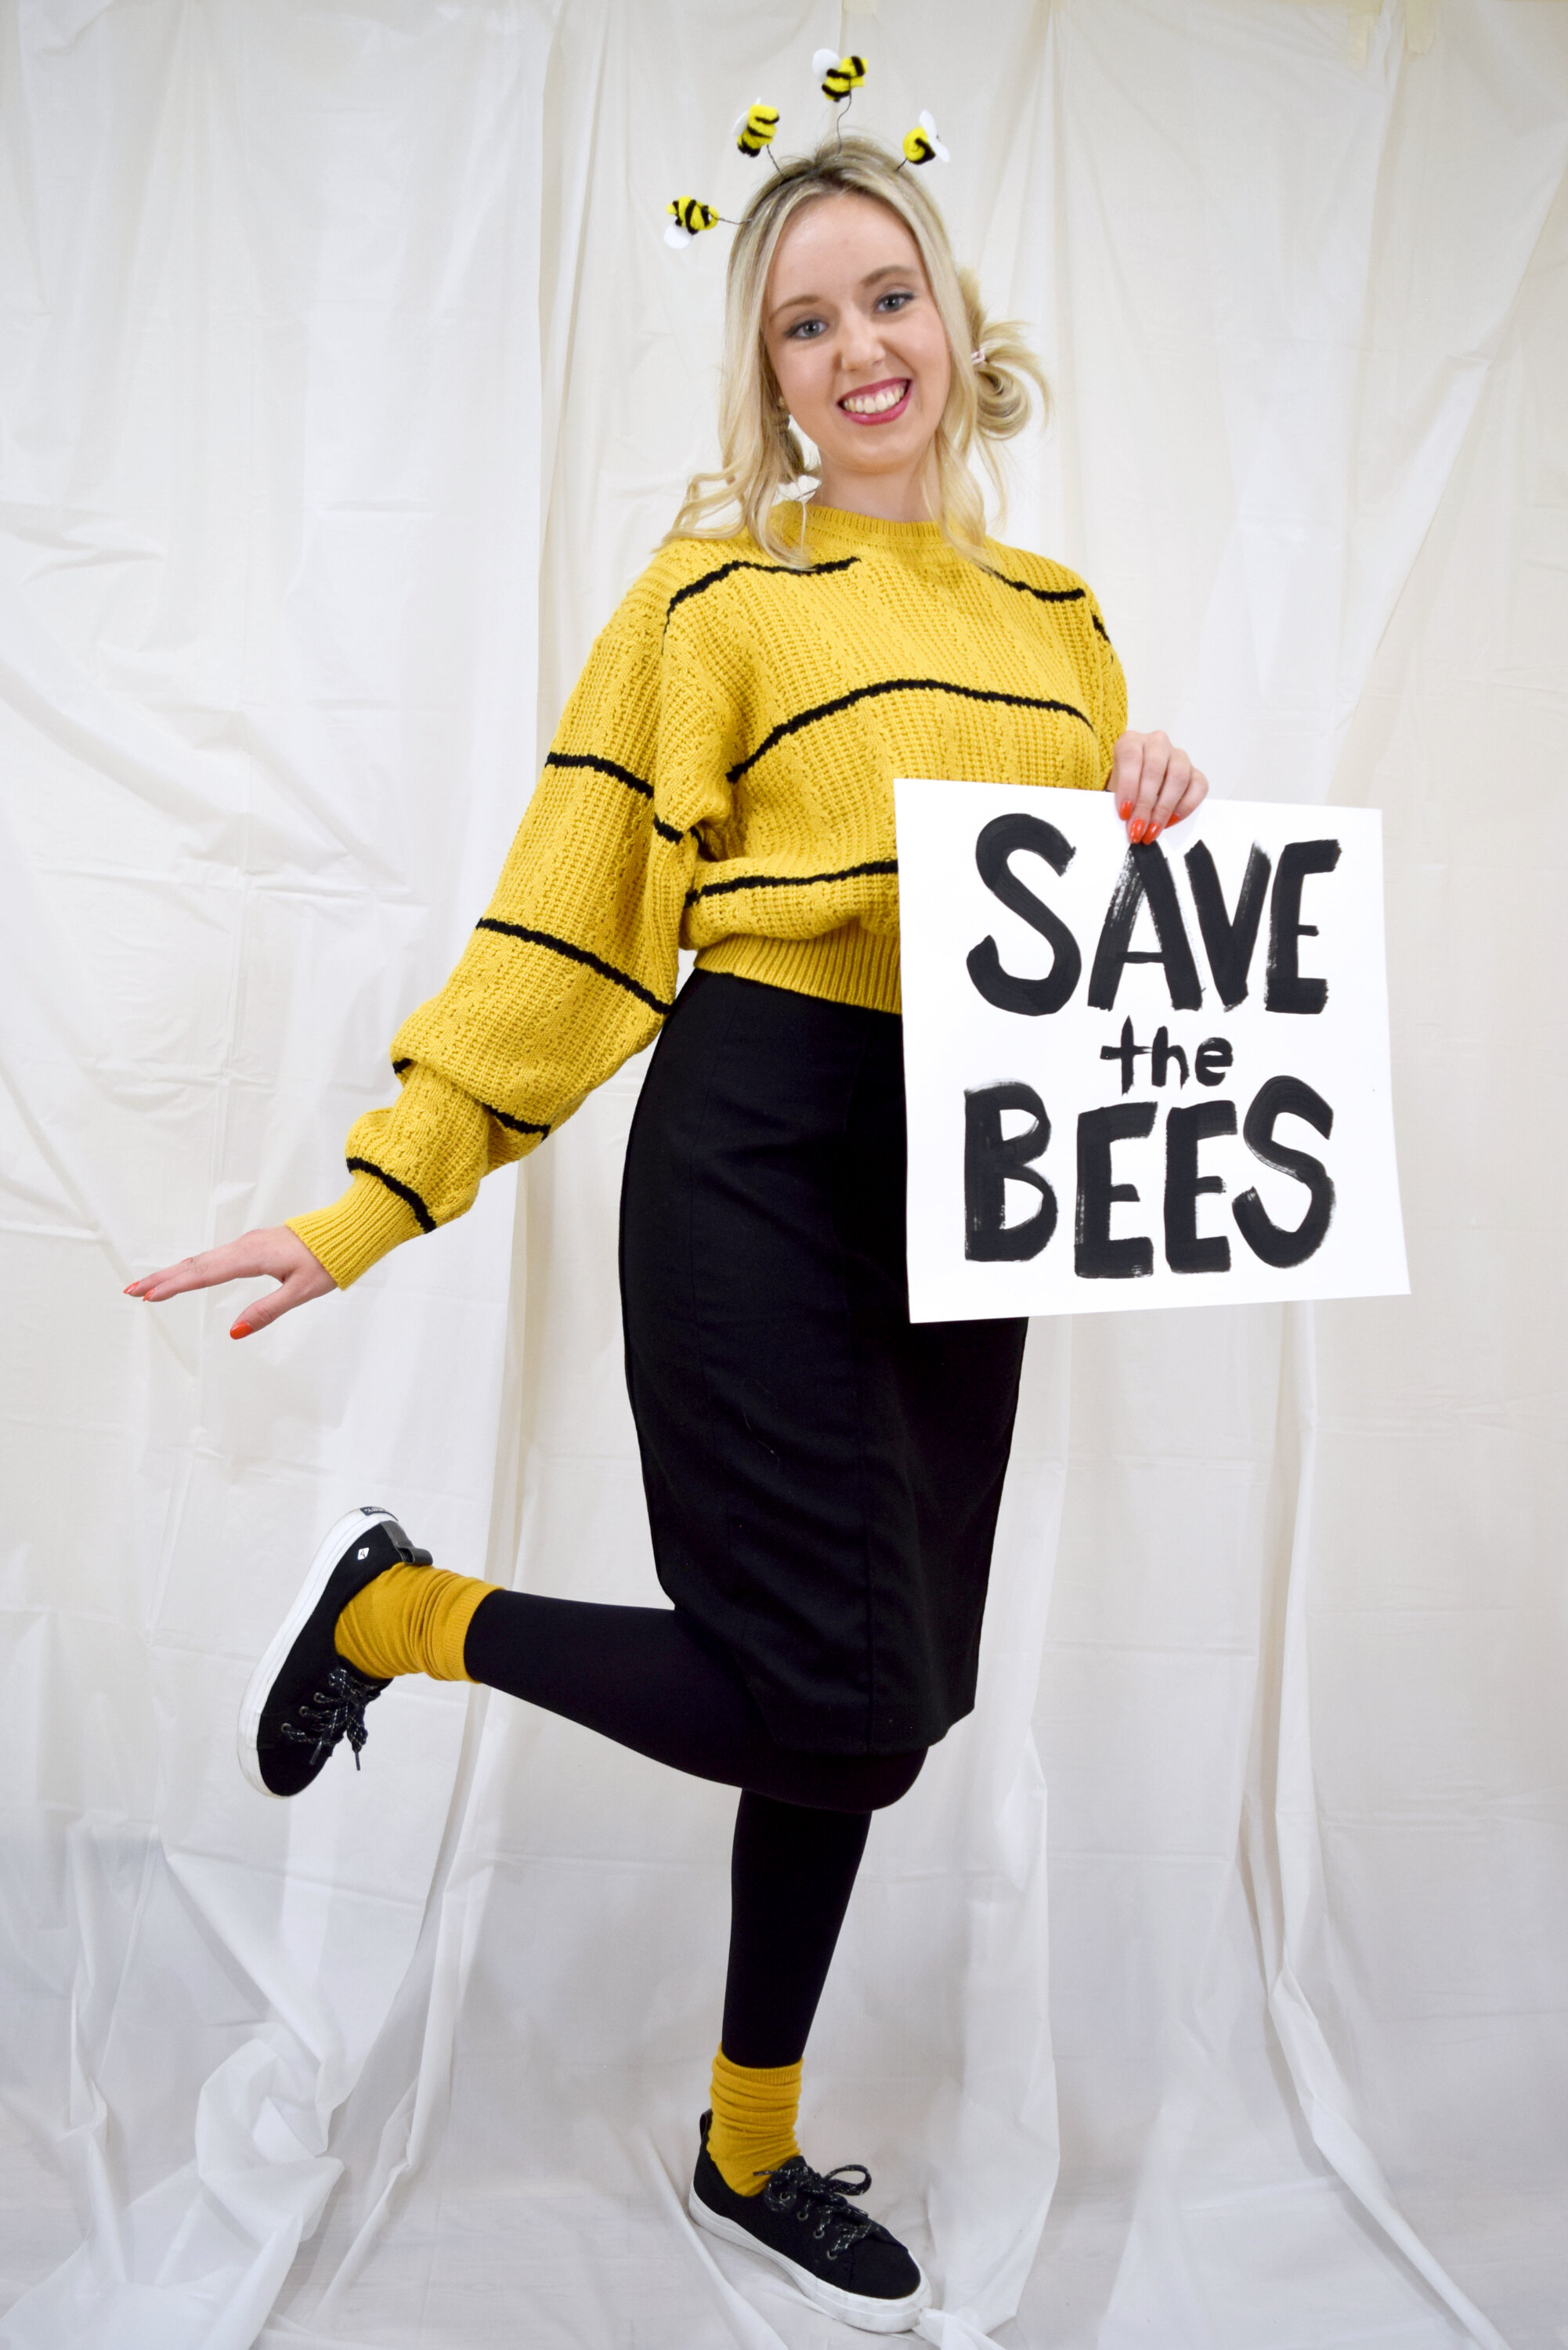 save-the-bees-costume-4.jpg